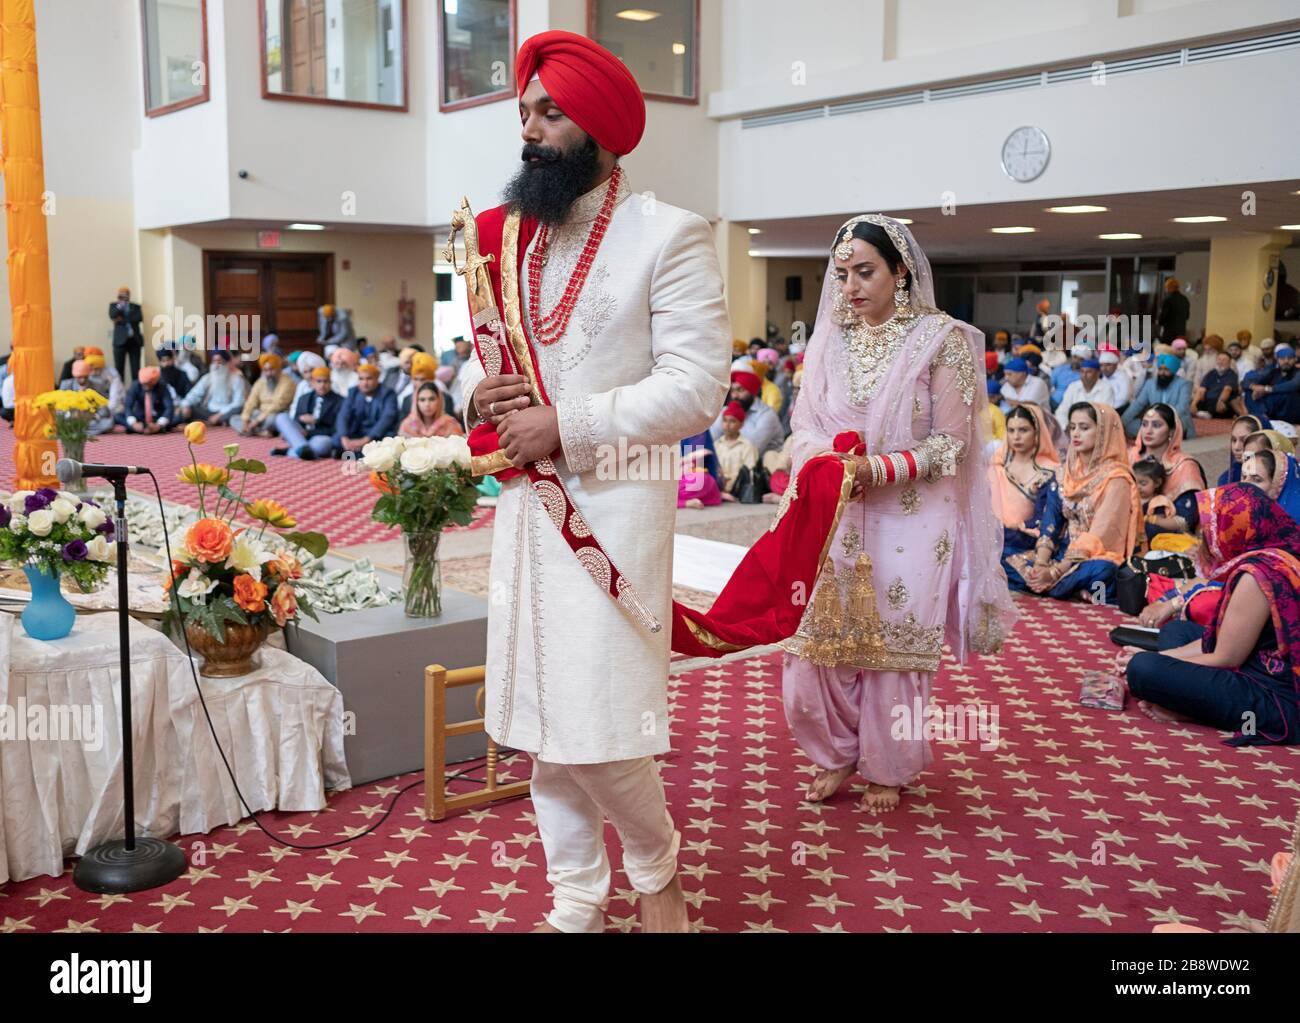 A Sikh bride and groom at their wedding ceremony in a temple in South Richmond Hill, Queens, New York City. Stock Photo